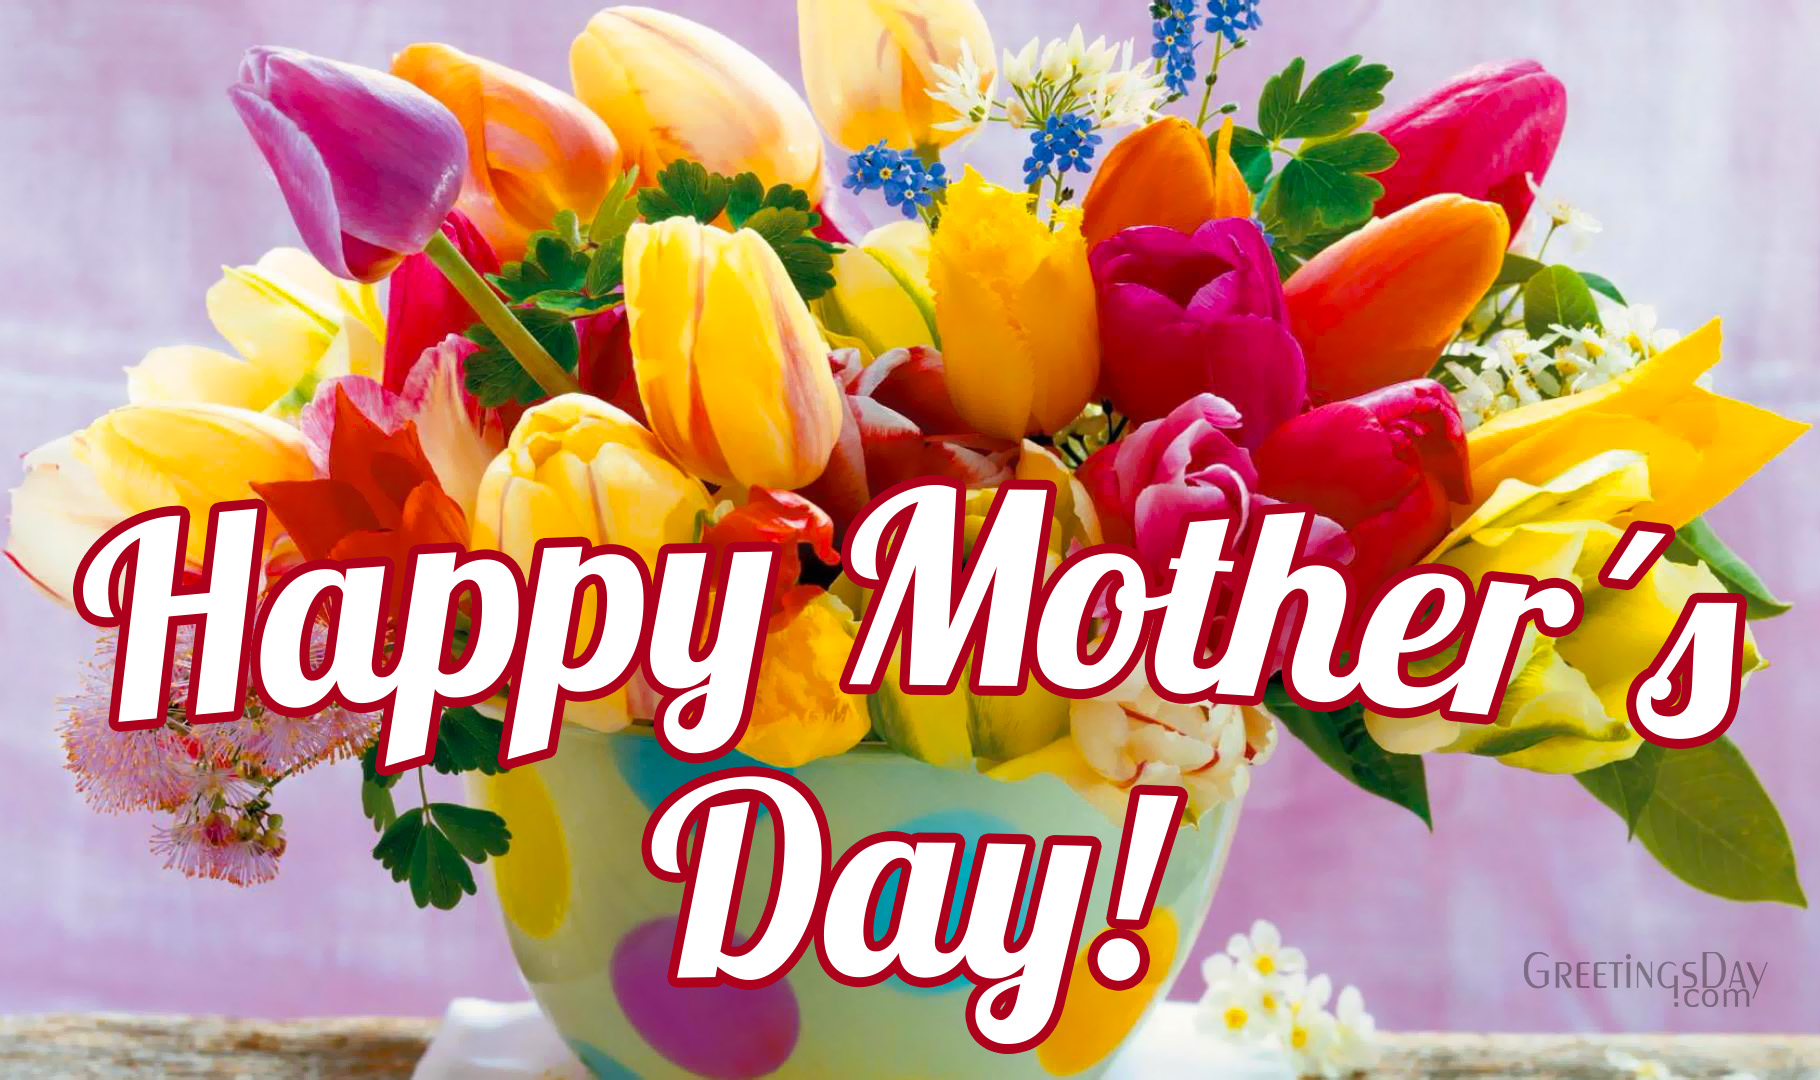 Happy Mother's Day - Online Cards, Photos and Wishes. Mother's Day